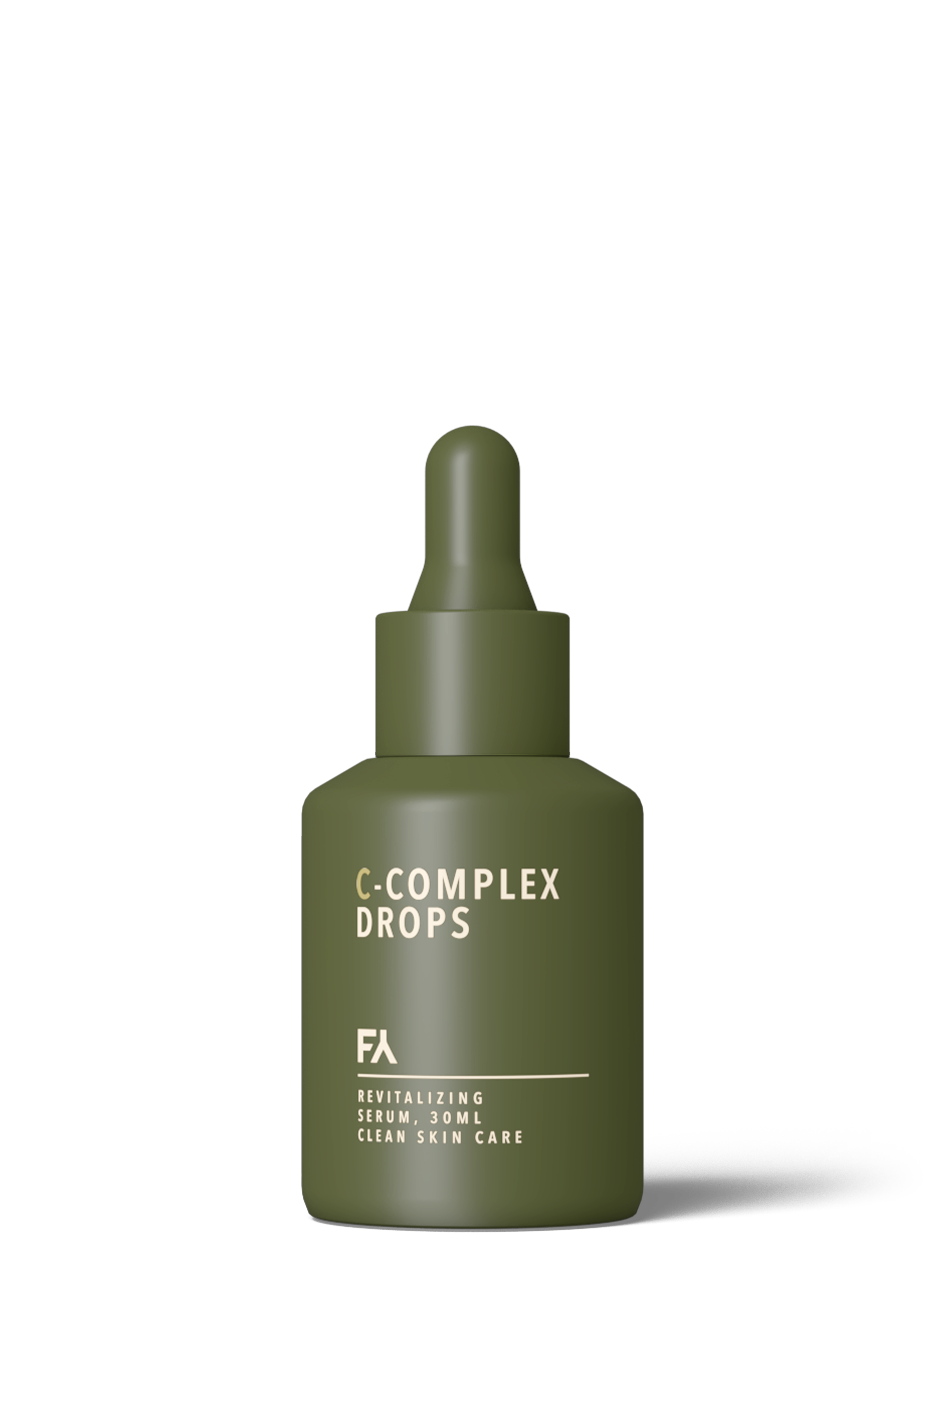 C-Complex Drops Revitalizing Serum by Fields of Yarrow, product image on transparent background